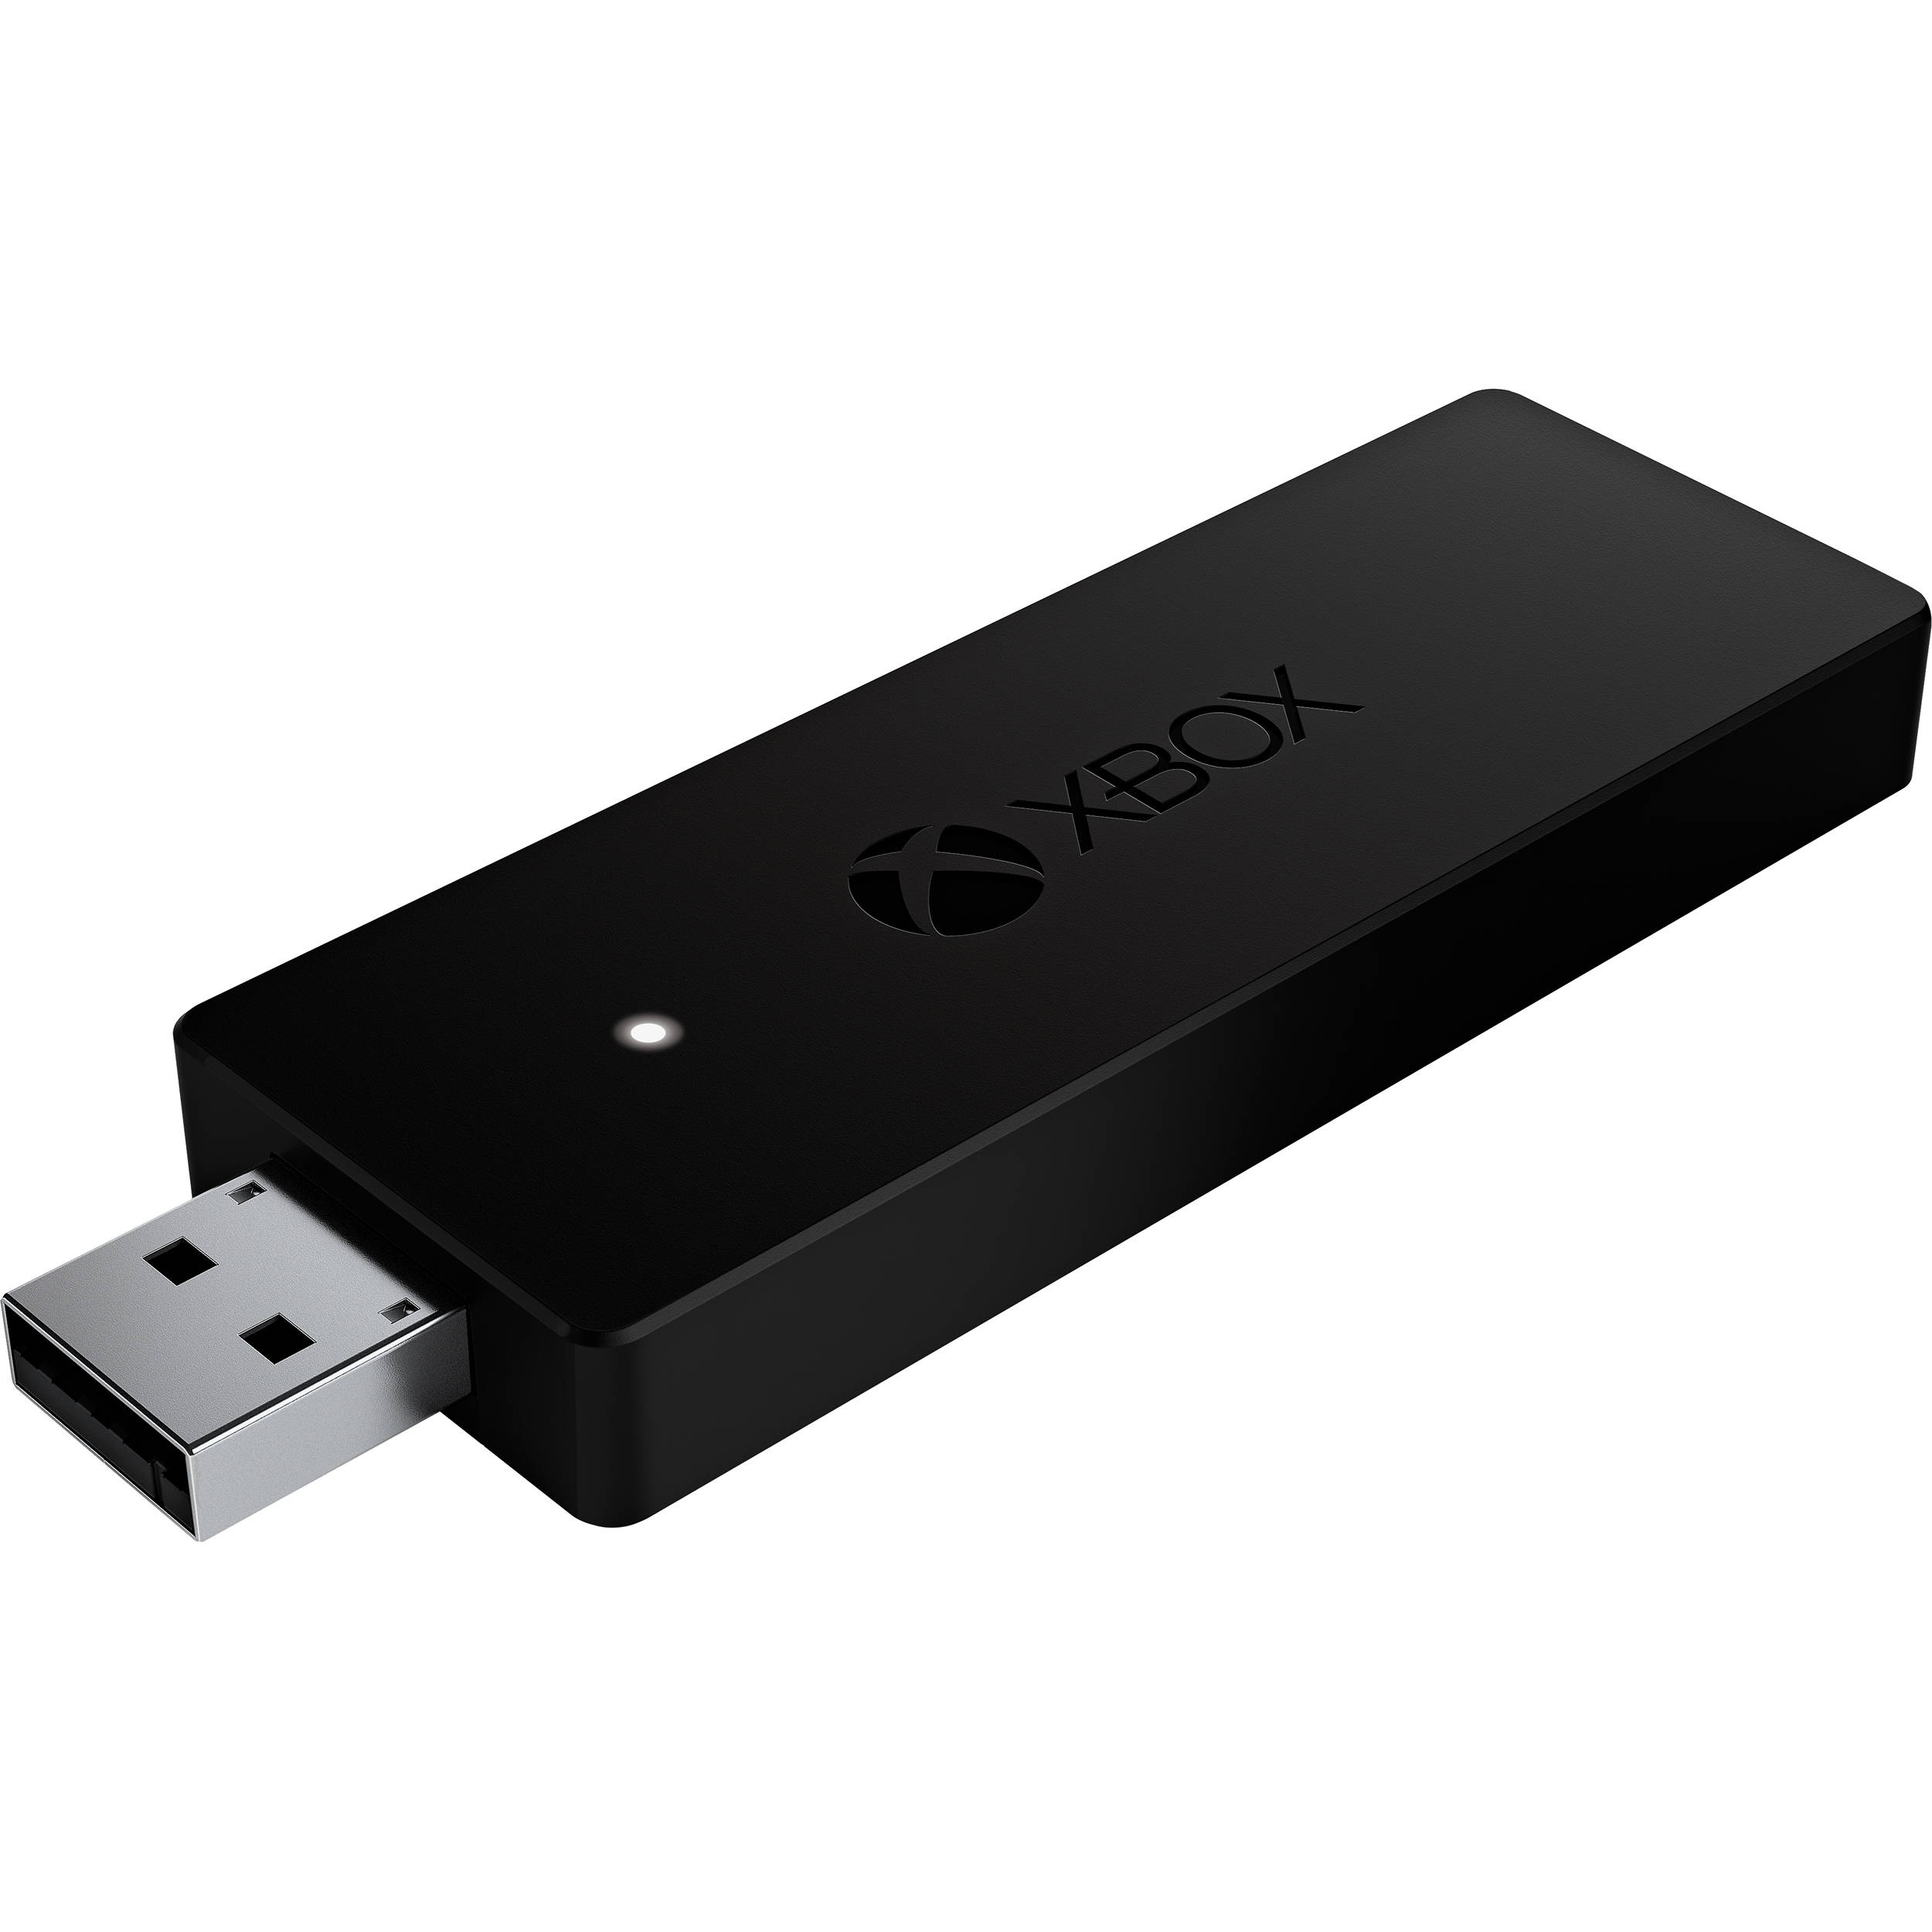 microsoft xbox wireless adapter for windows 10 stores